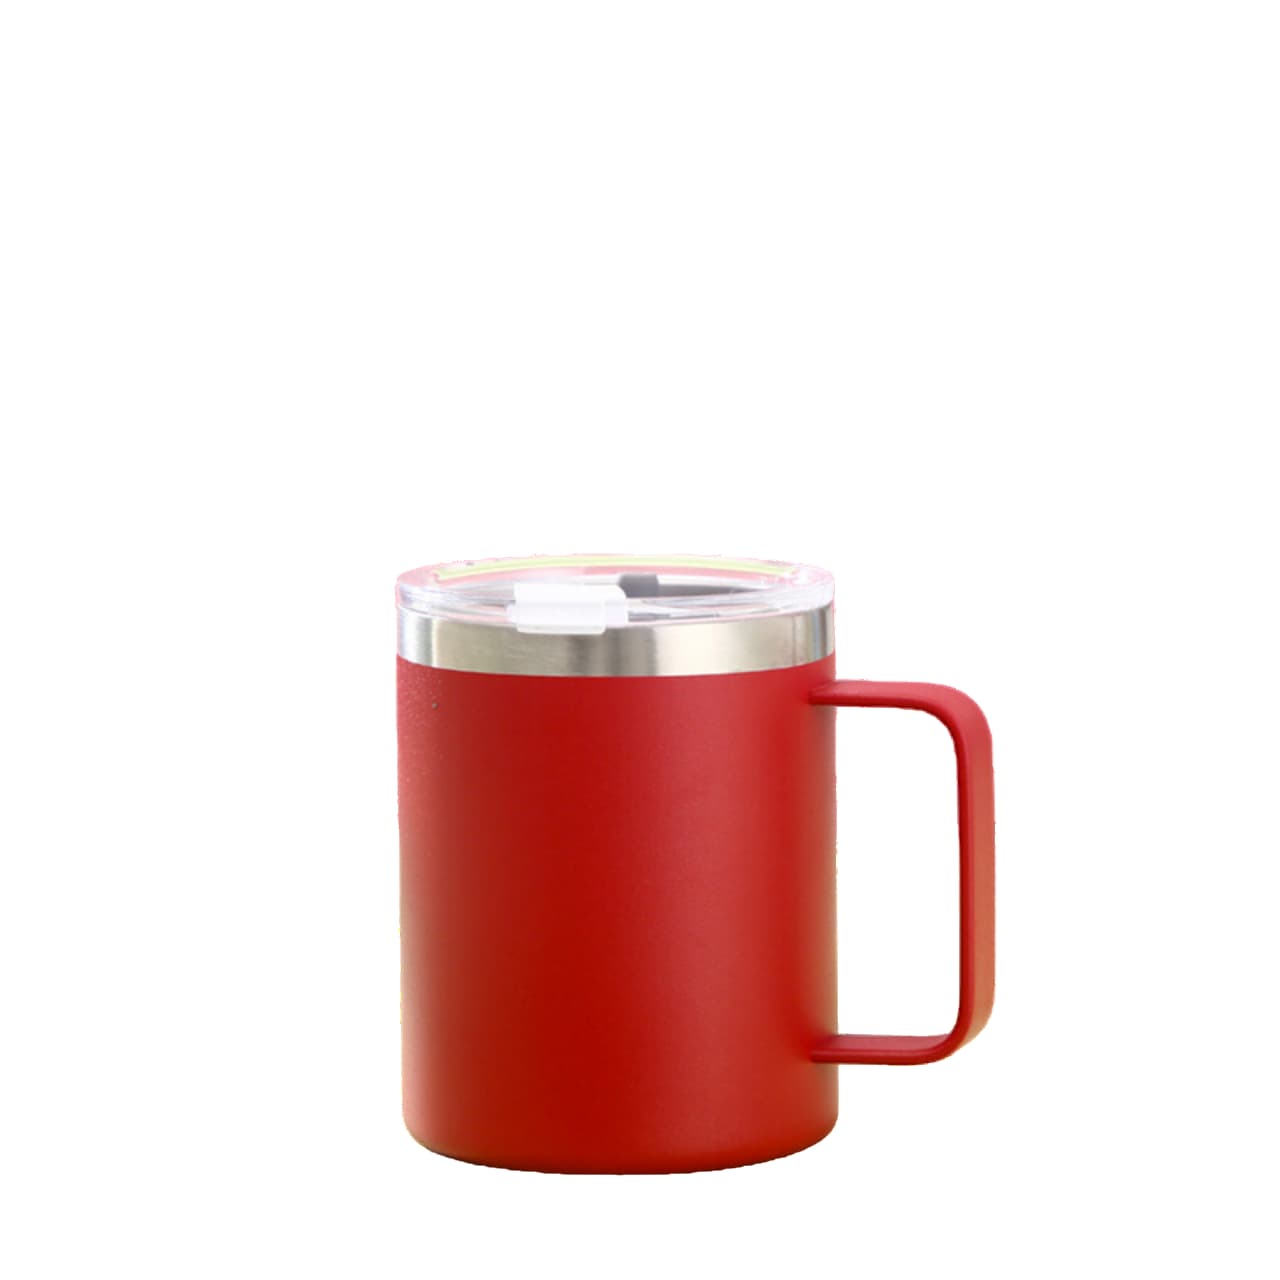 304 stainless steel CUP with handle-red